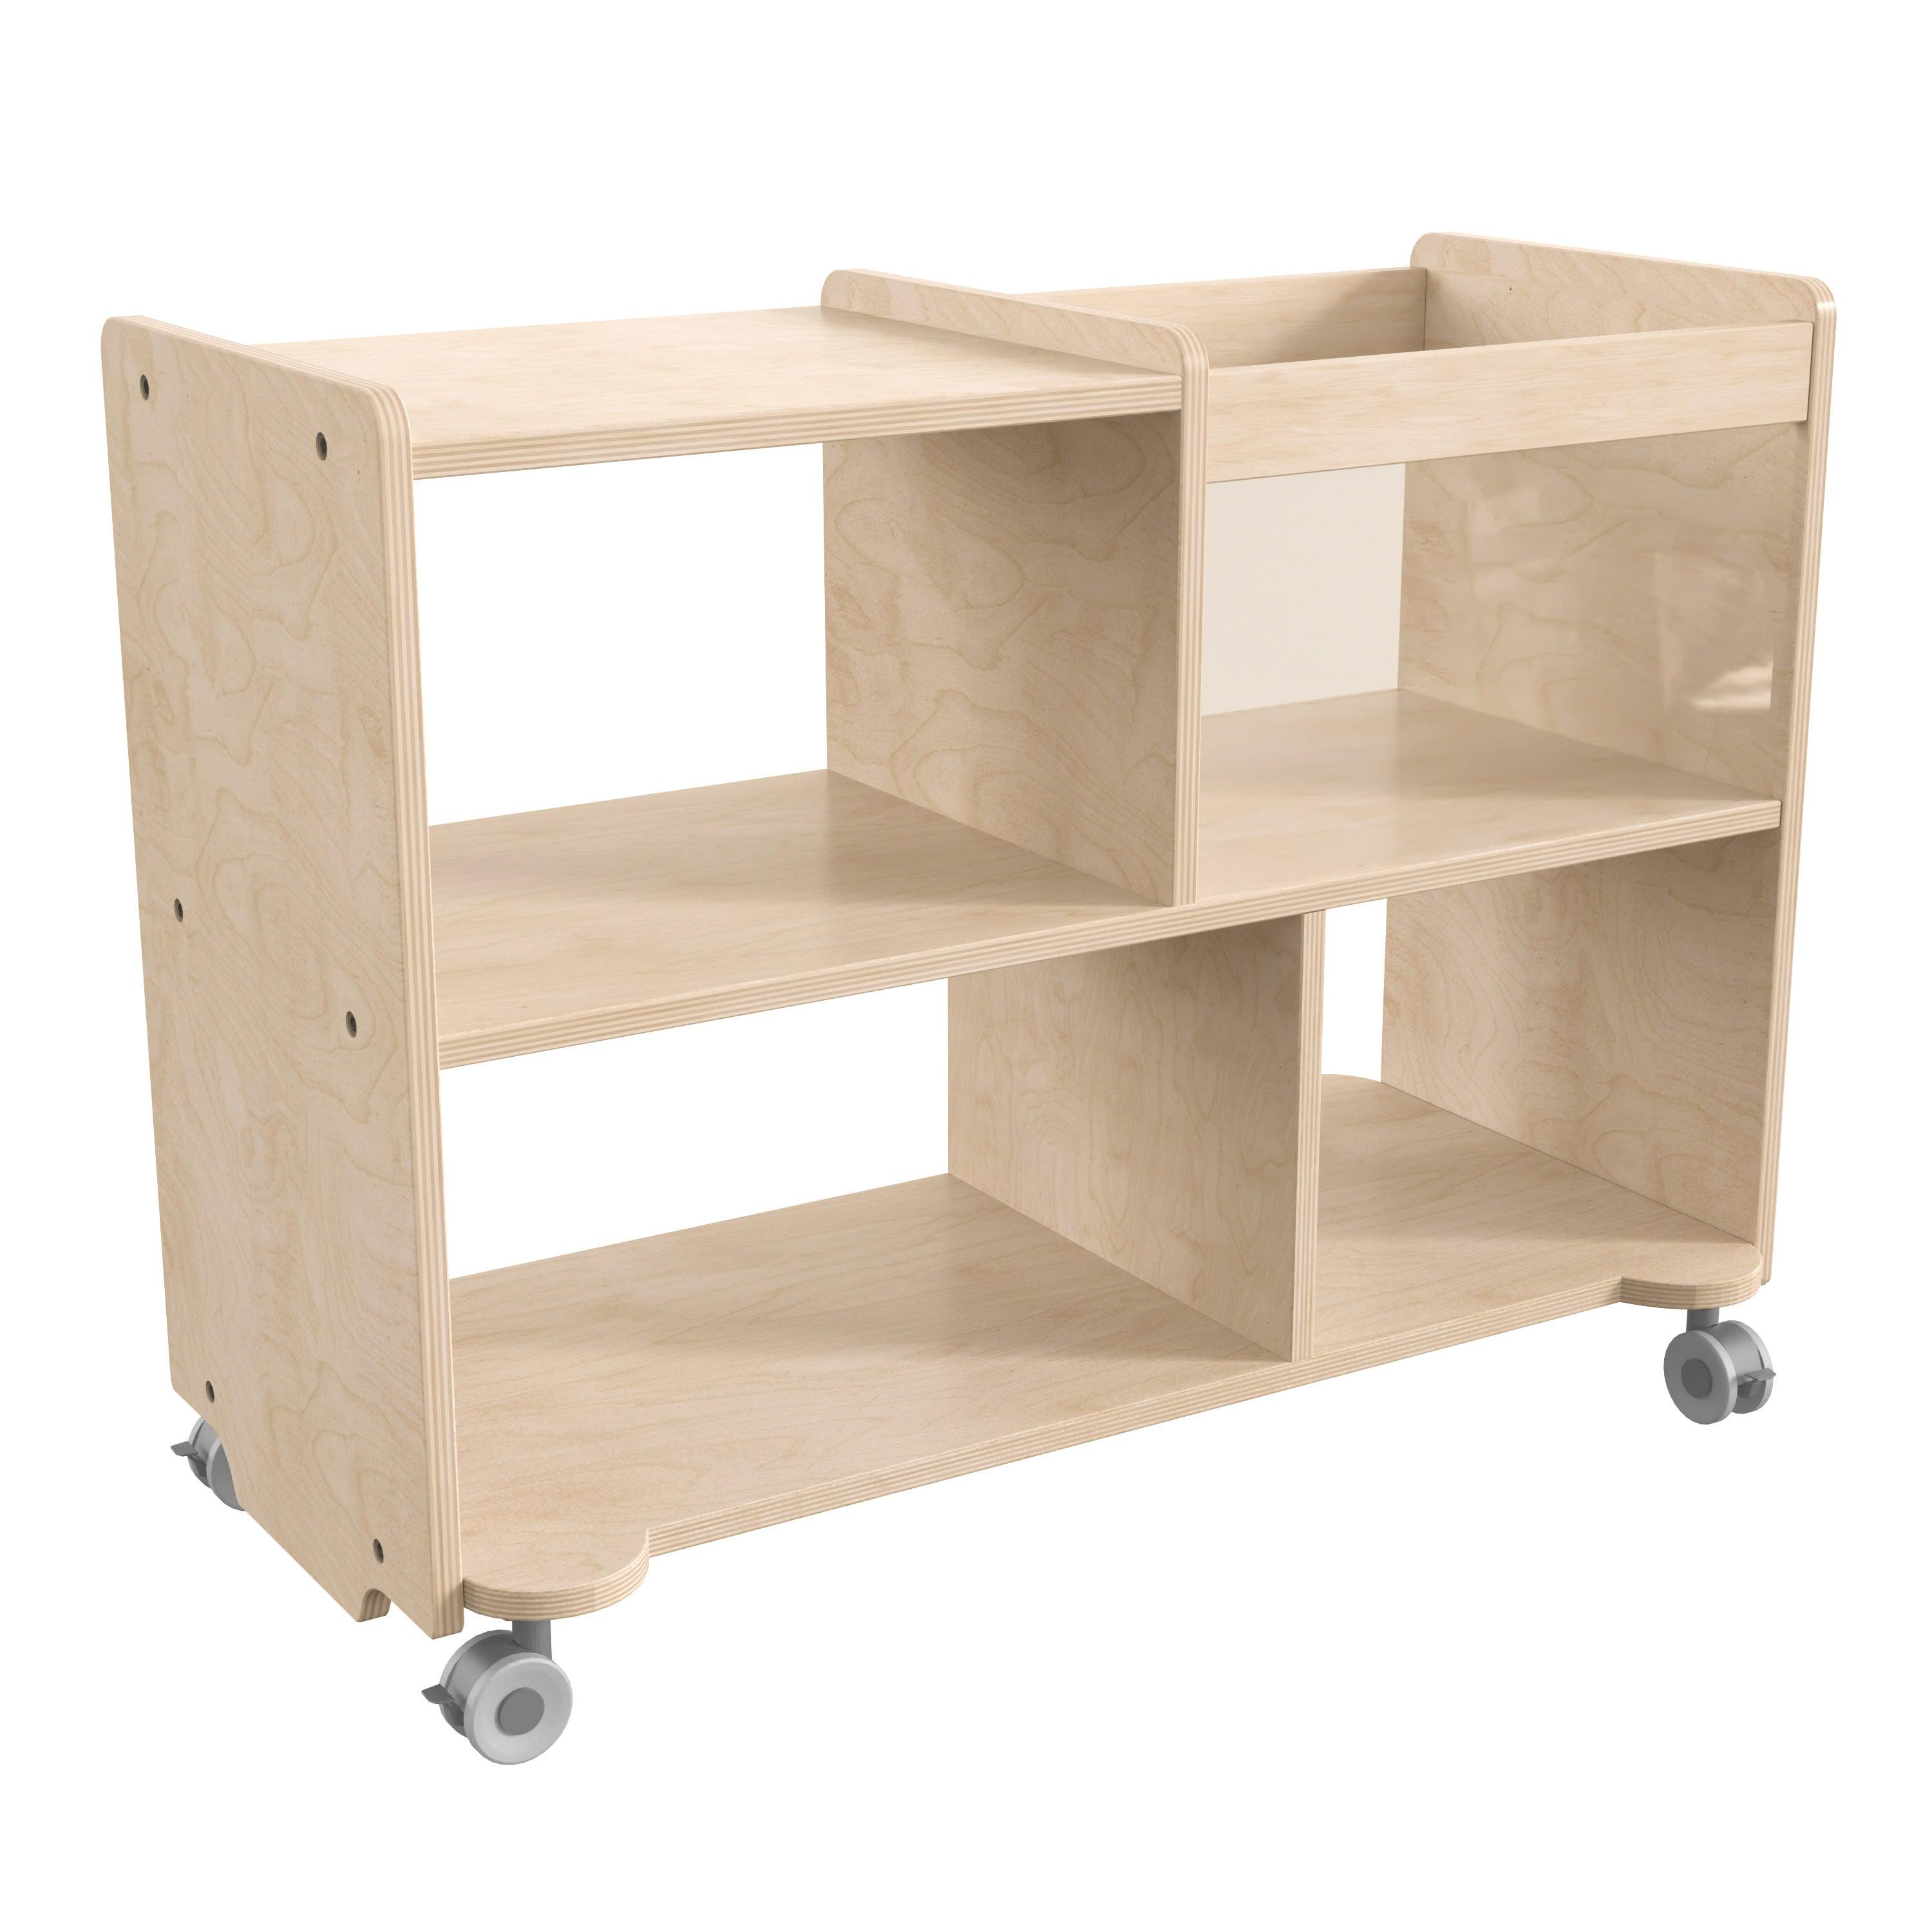 Flash Furniture MK-KE24251-GG Bright Beginnings Commercial Double Sided Space Saving Wooden Mobile Storage Cart - Locking Casters - 4 Compartmen